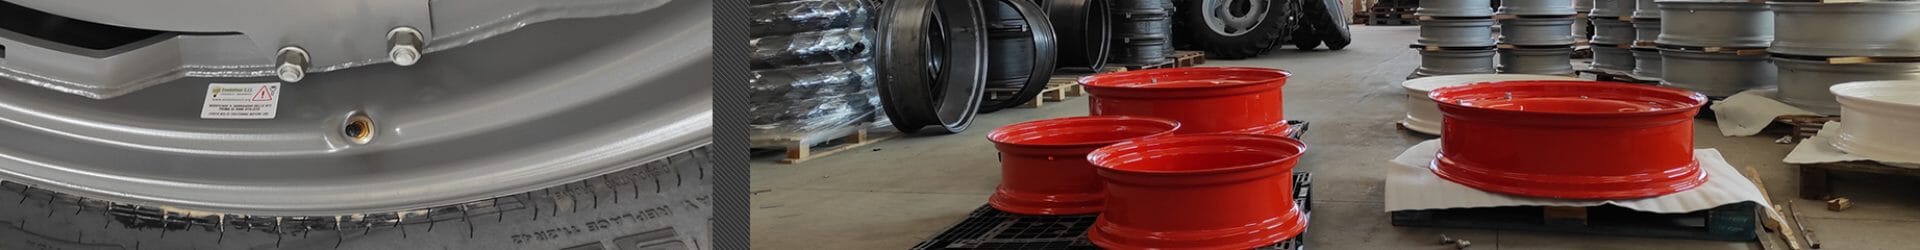 TRACTOR, XL AND FLOTATION WHEELS PRODUCTION